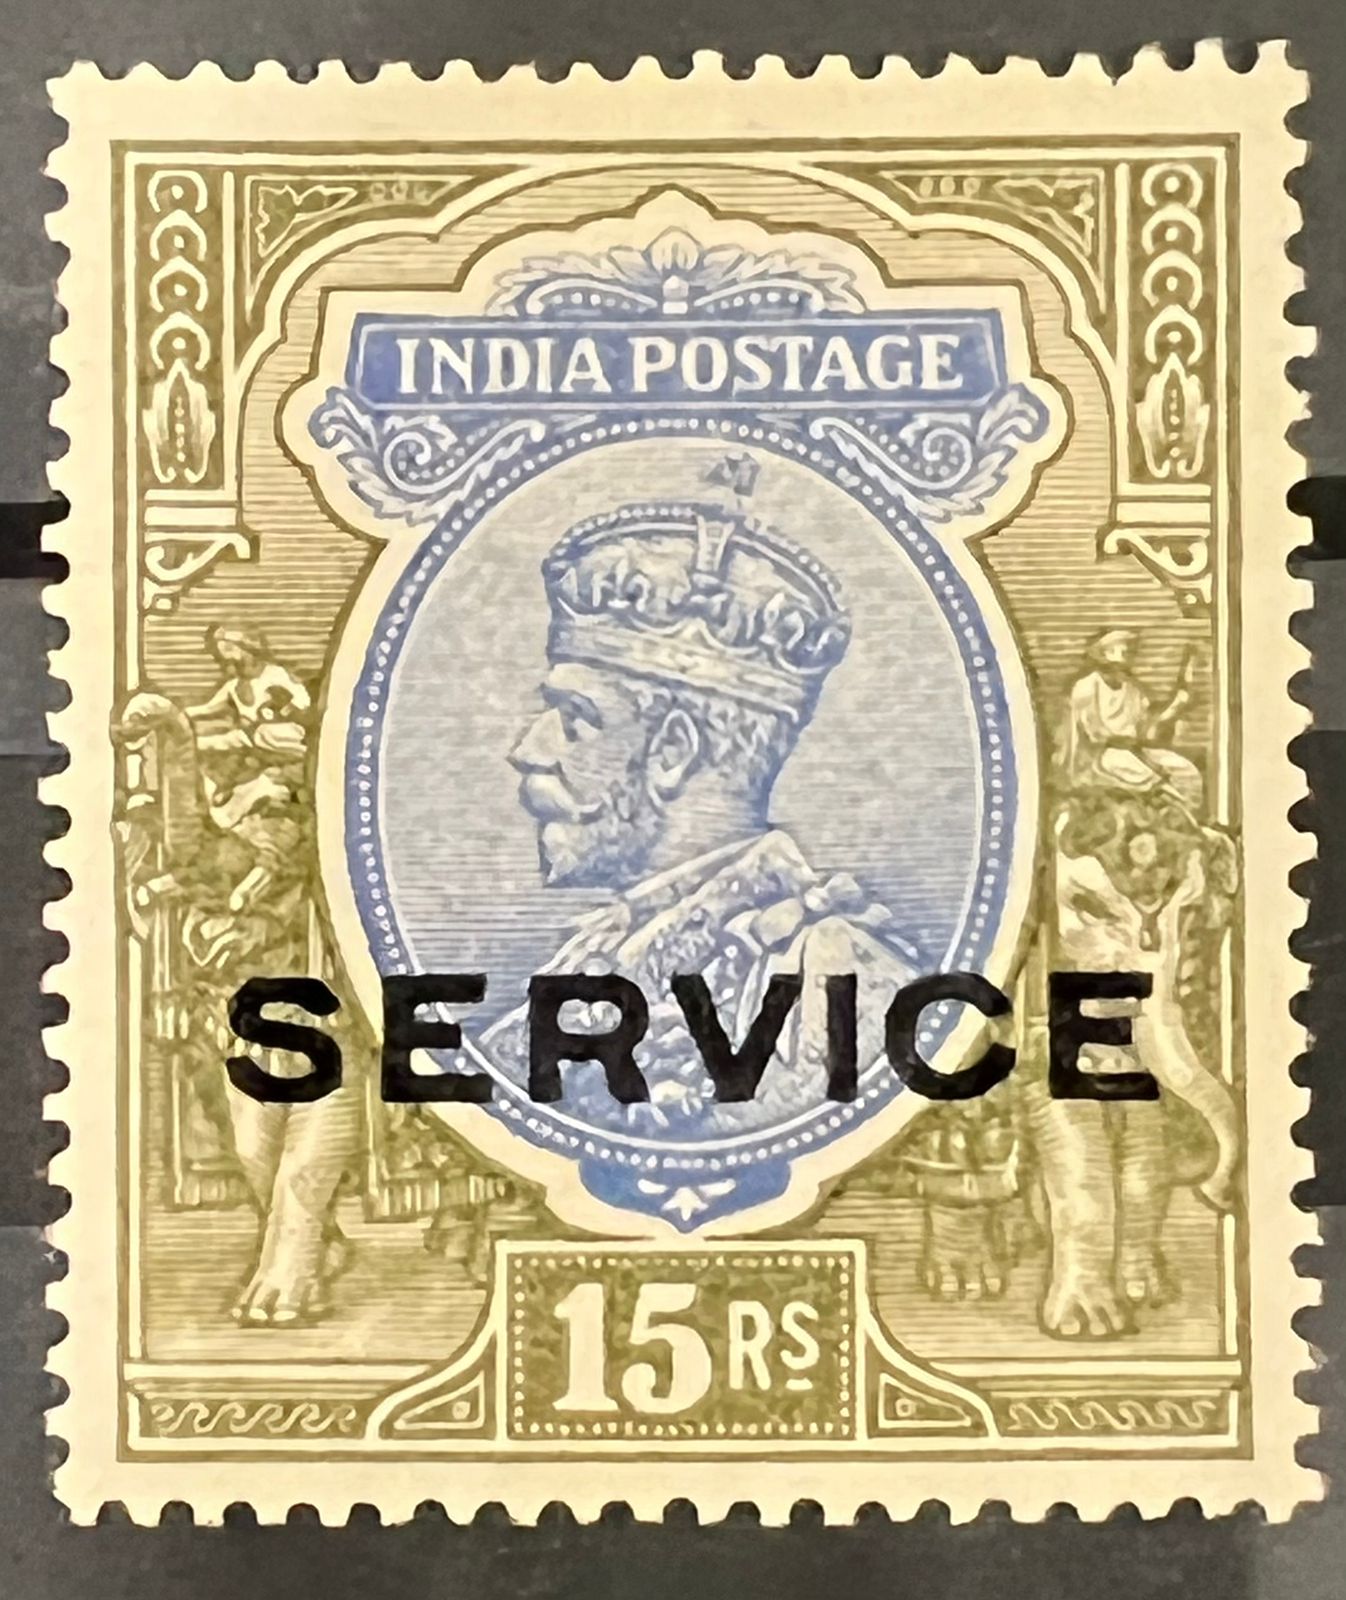 India 1913 KGV Service Single Star Wmk 15Rs ESSAY  " Shiny Ink Overprint " without Gum as issued Rare